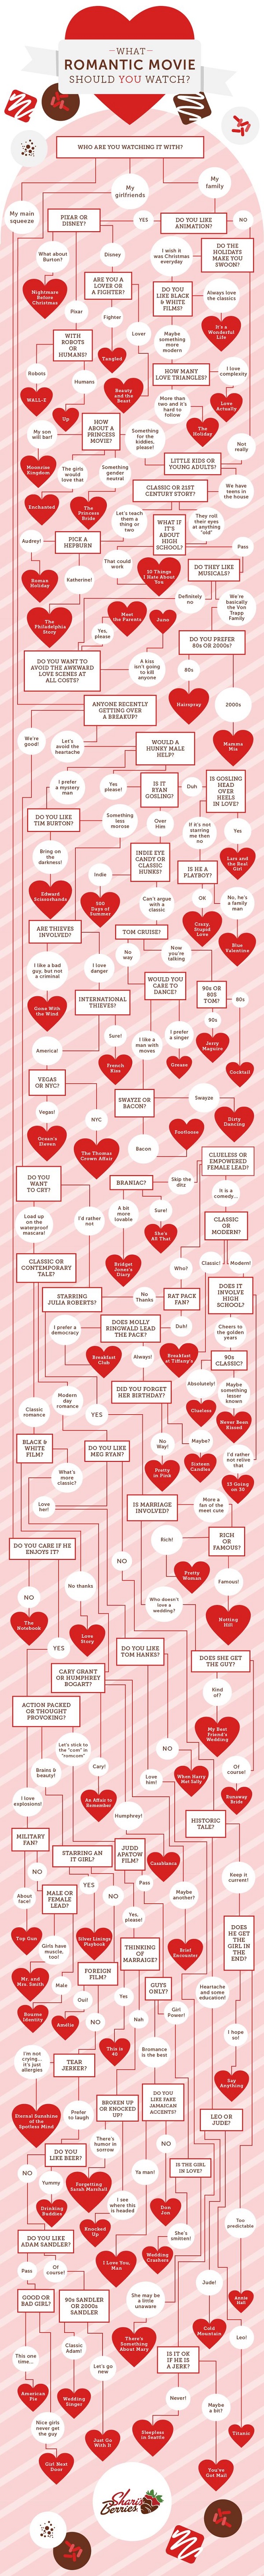 What Romantic Movie Should You Watch